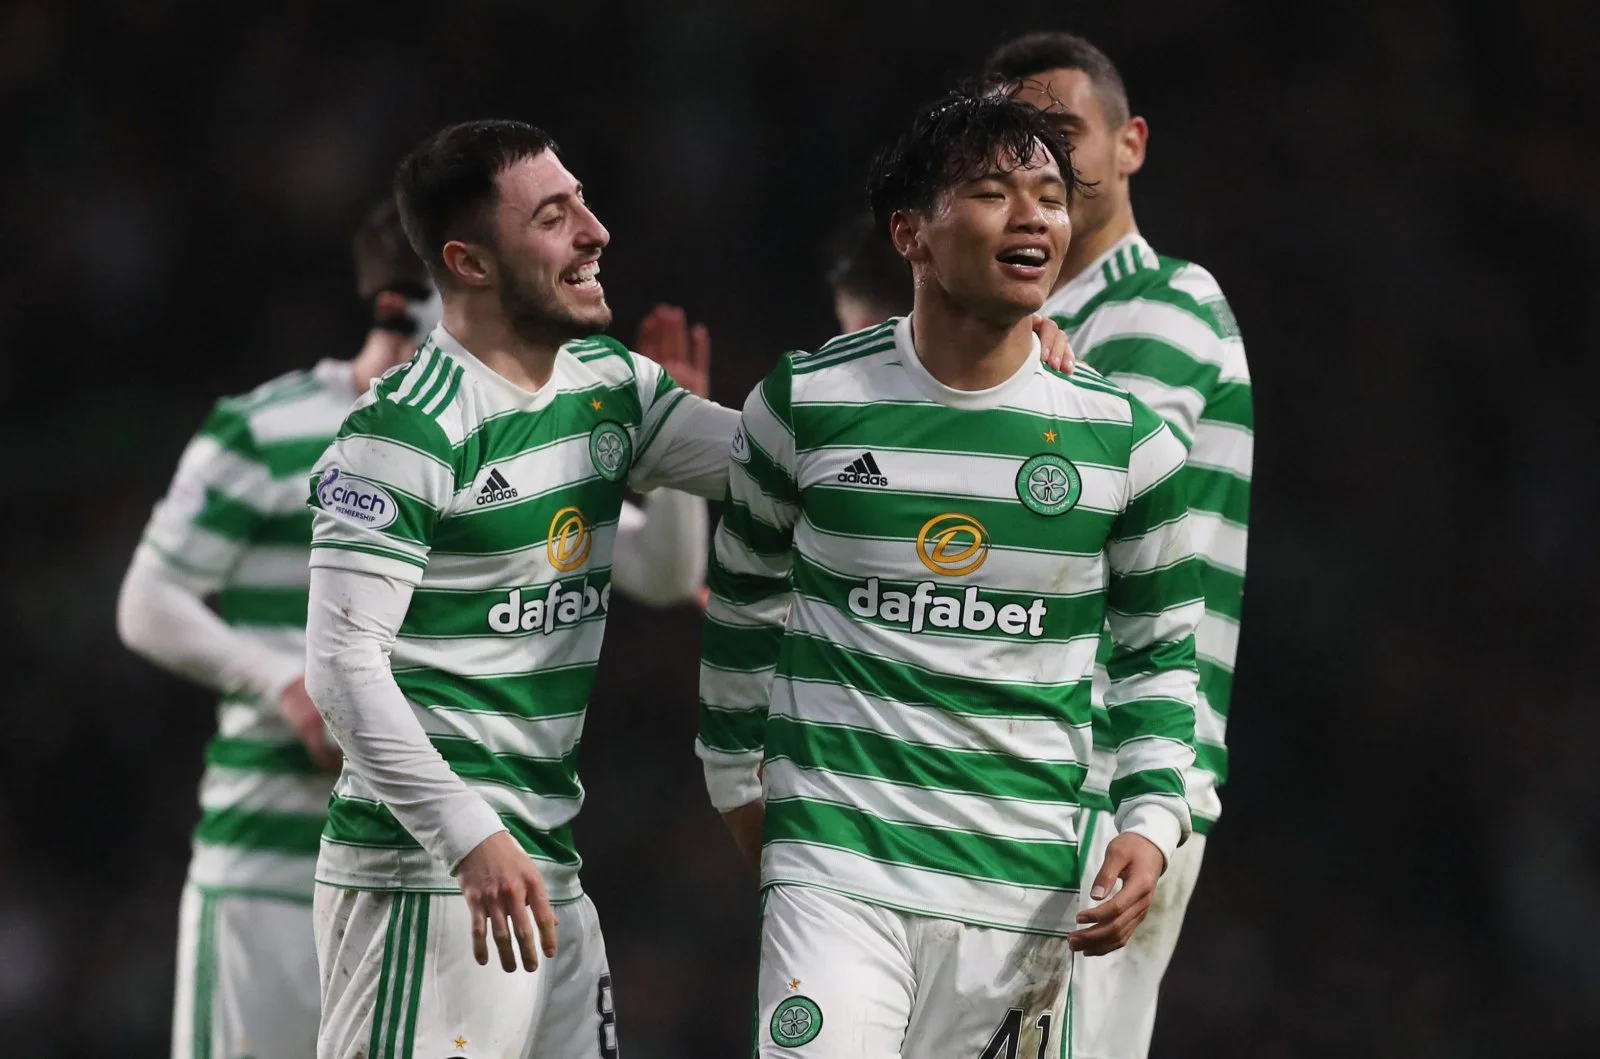 BBC Report: Celtic players are calling the youngster from the other side of the world, captivated by the scale of Scottish football’s most iconic club…